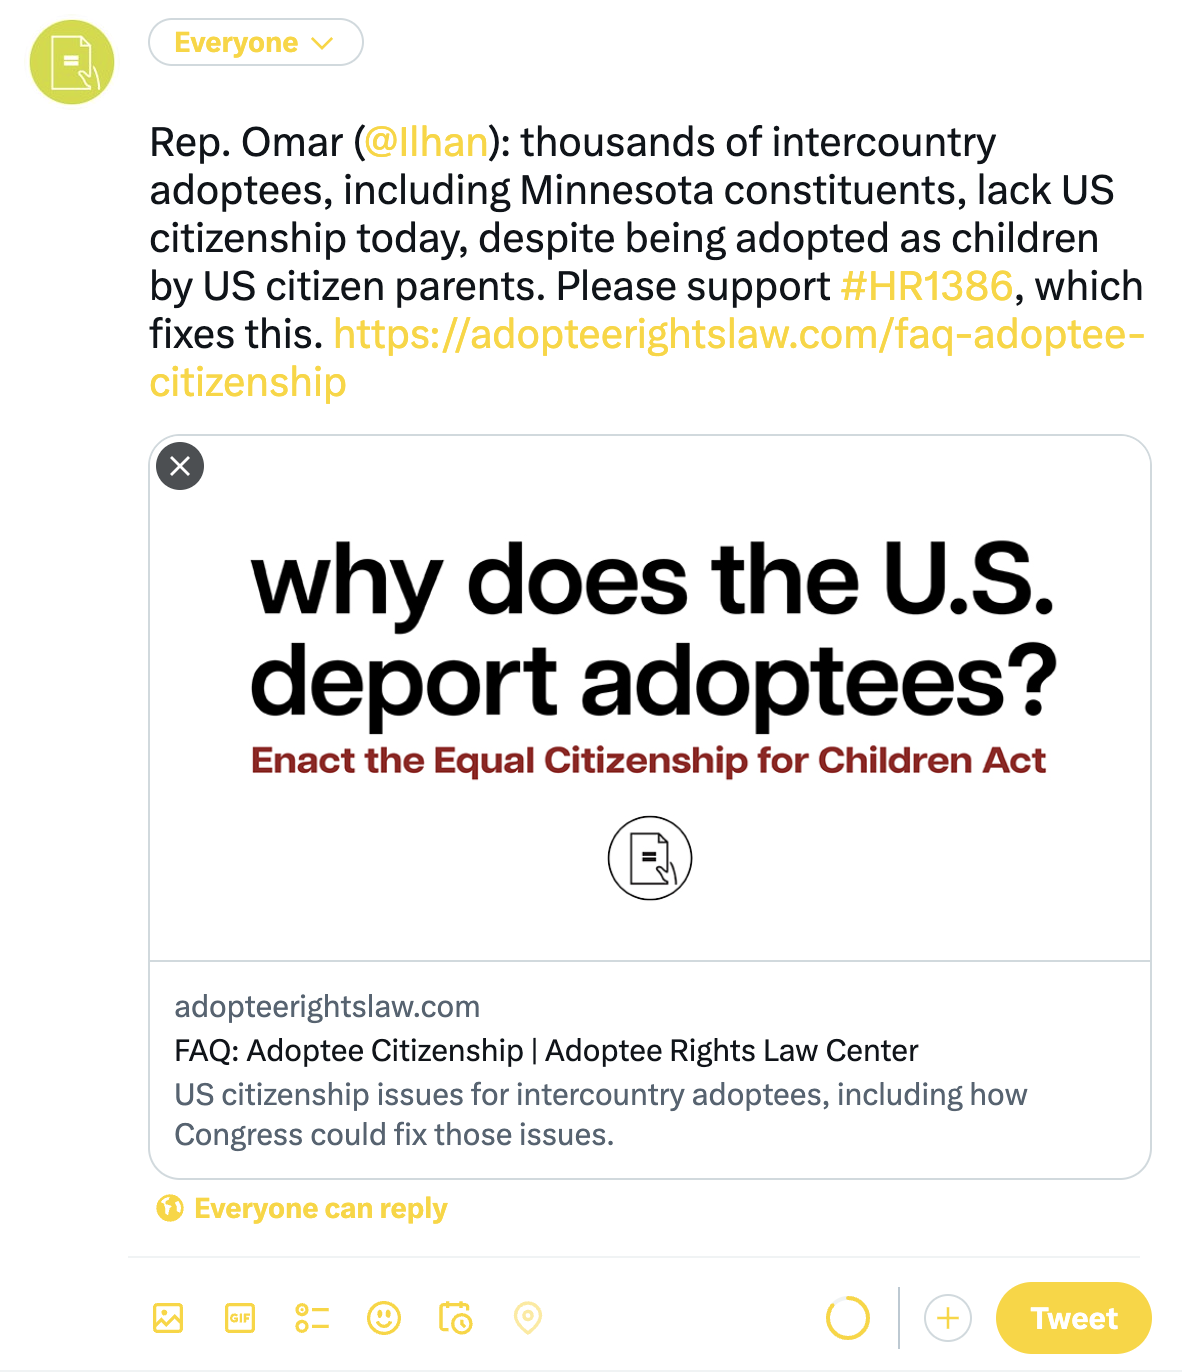 Sample Tweet to Rep. Ilhan Omar of Minnesota, stating "Rep. Omar (@Ilhan): thousands of intercountry adoptees, including Minnesota constituents, lack US citizenship today, despite being adopted as children by US citizen parents. Please support #HR1386, which fixes this